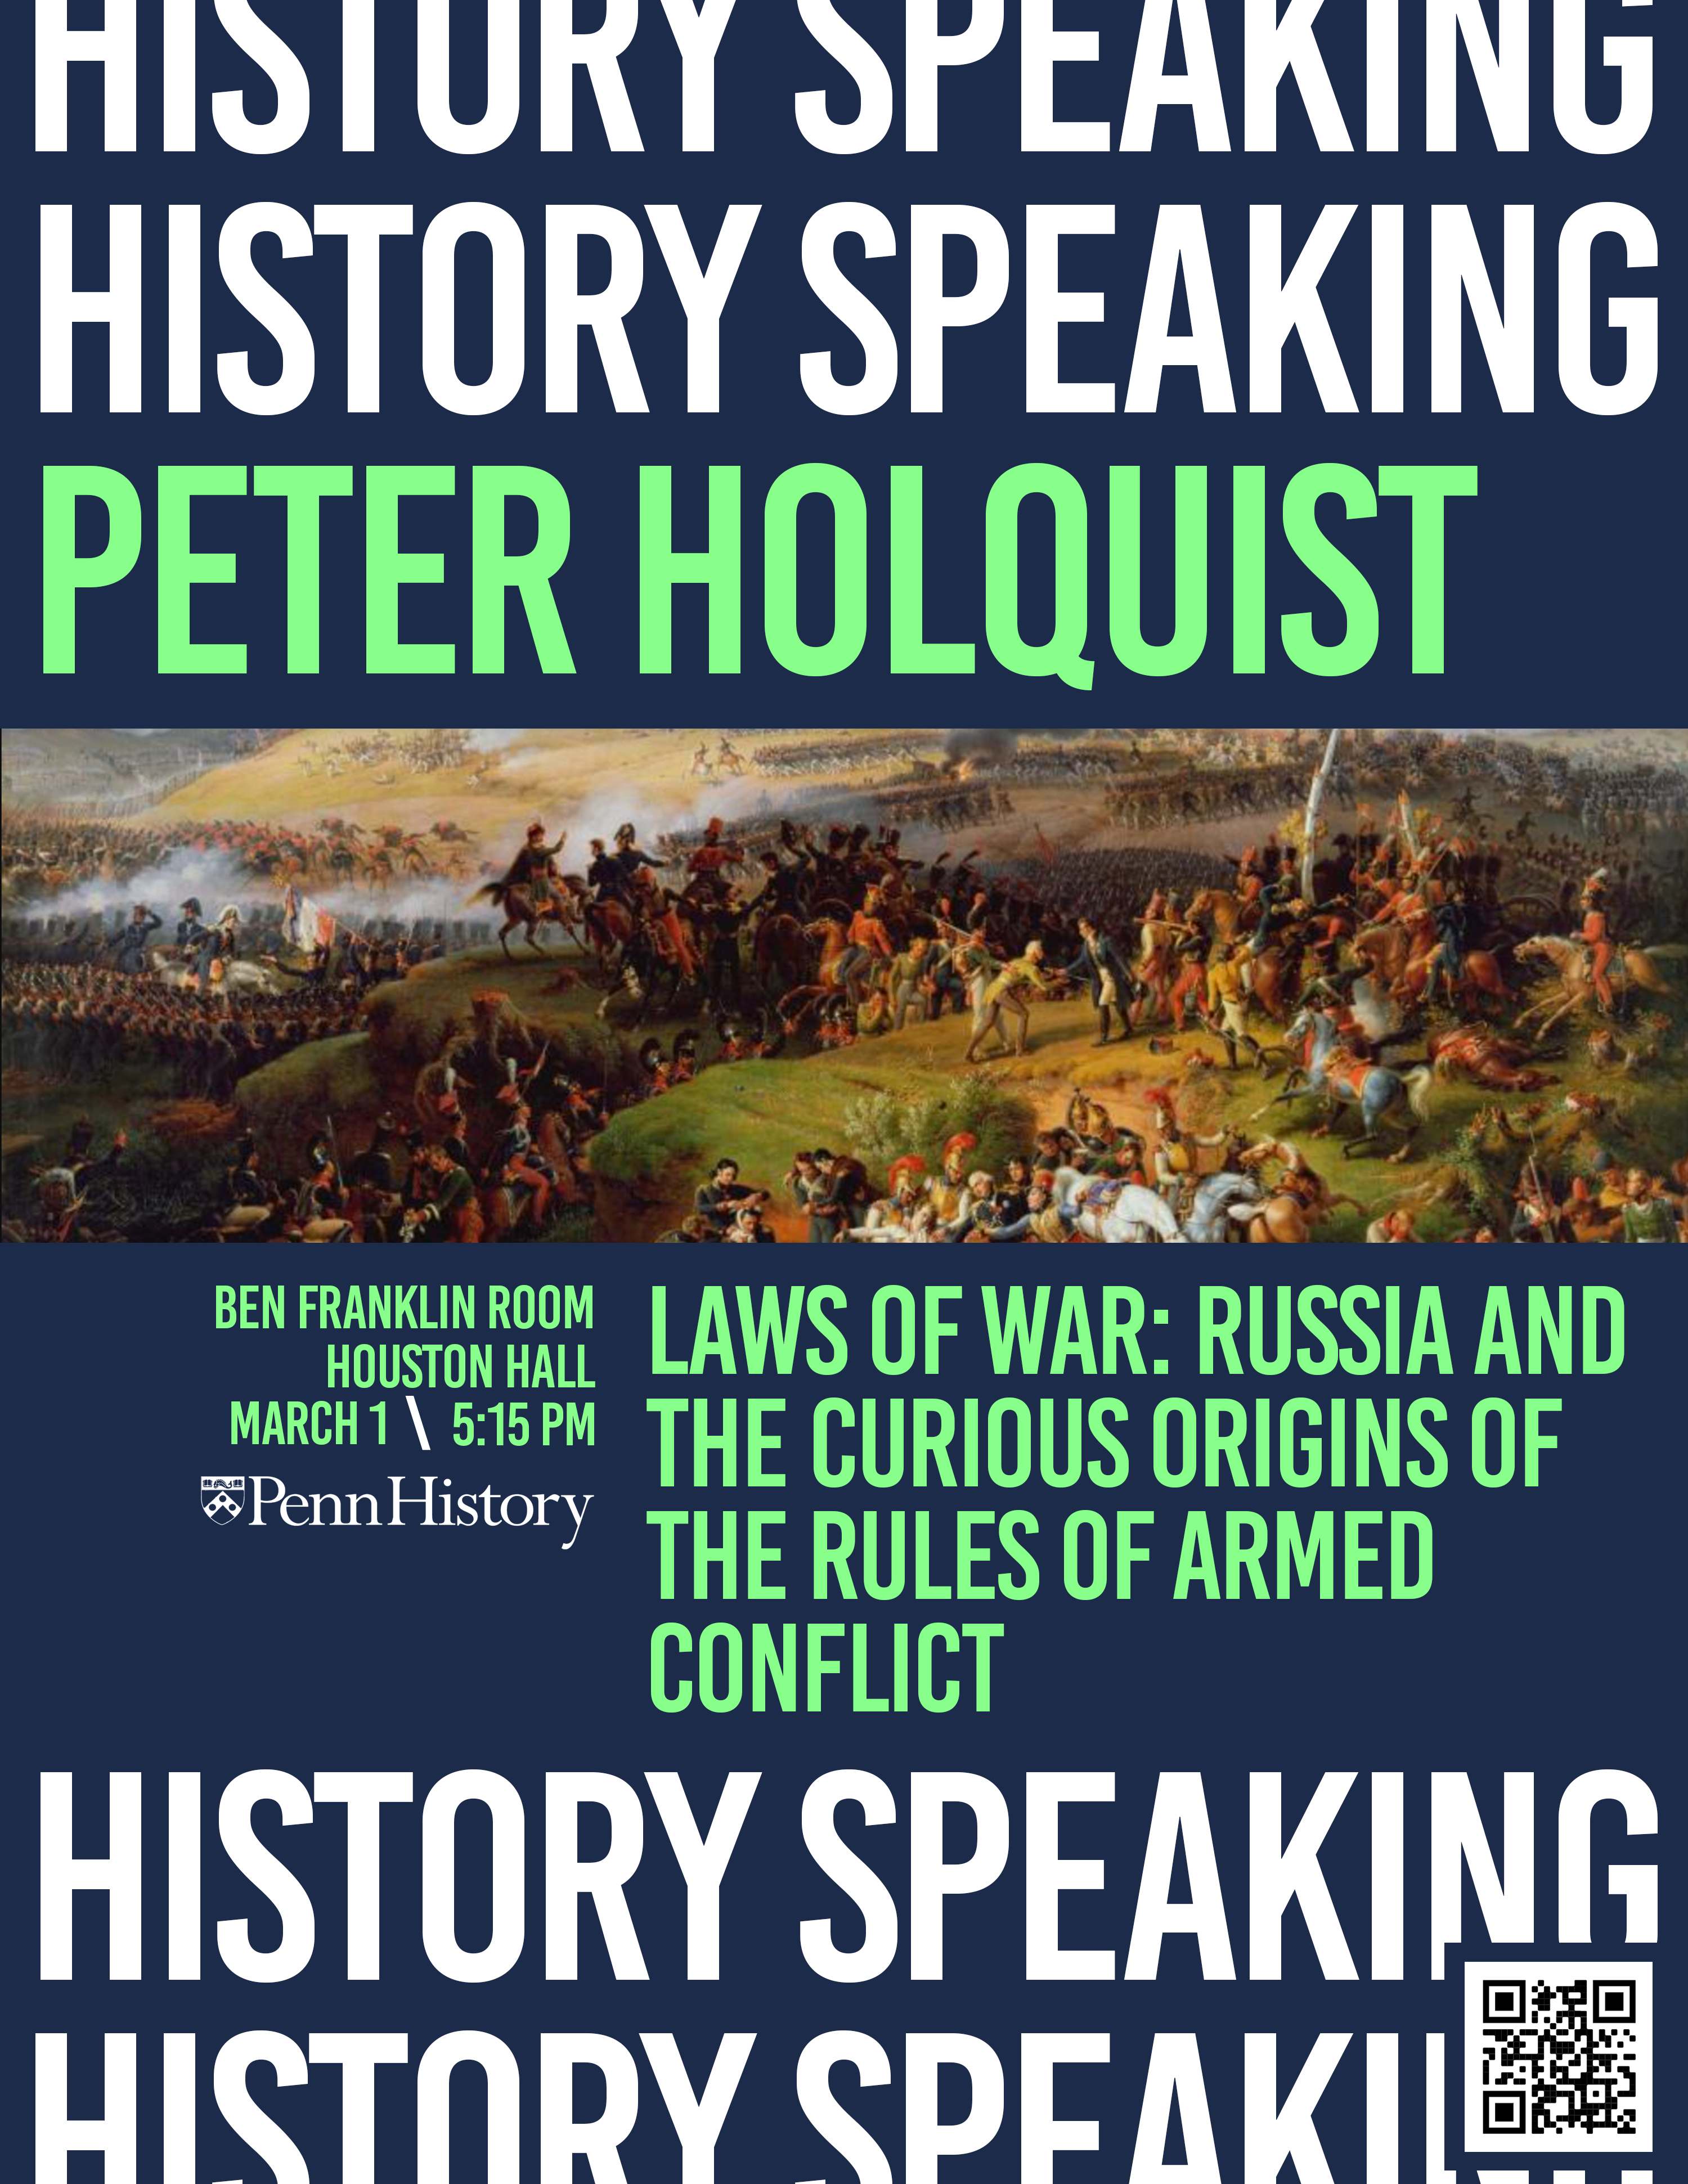 Flyer for Peter Holquist History Speaking Event